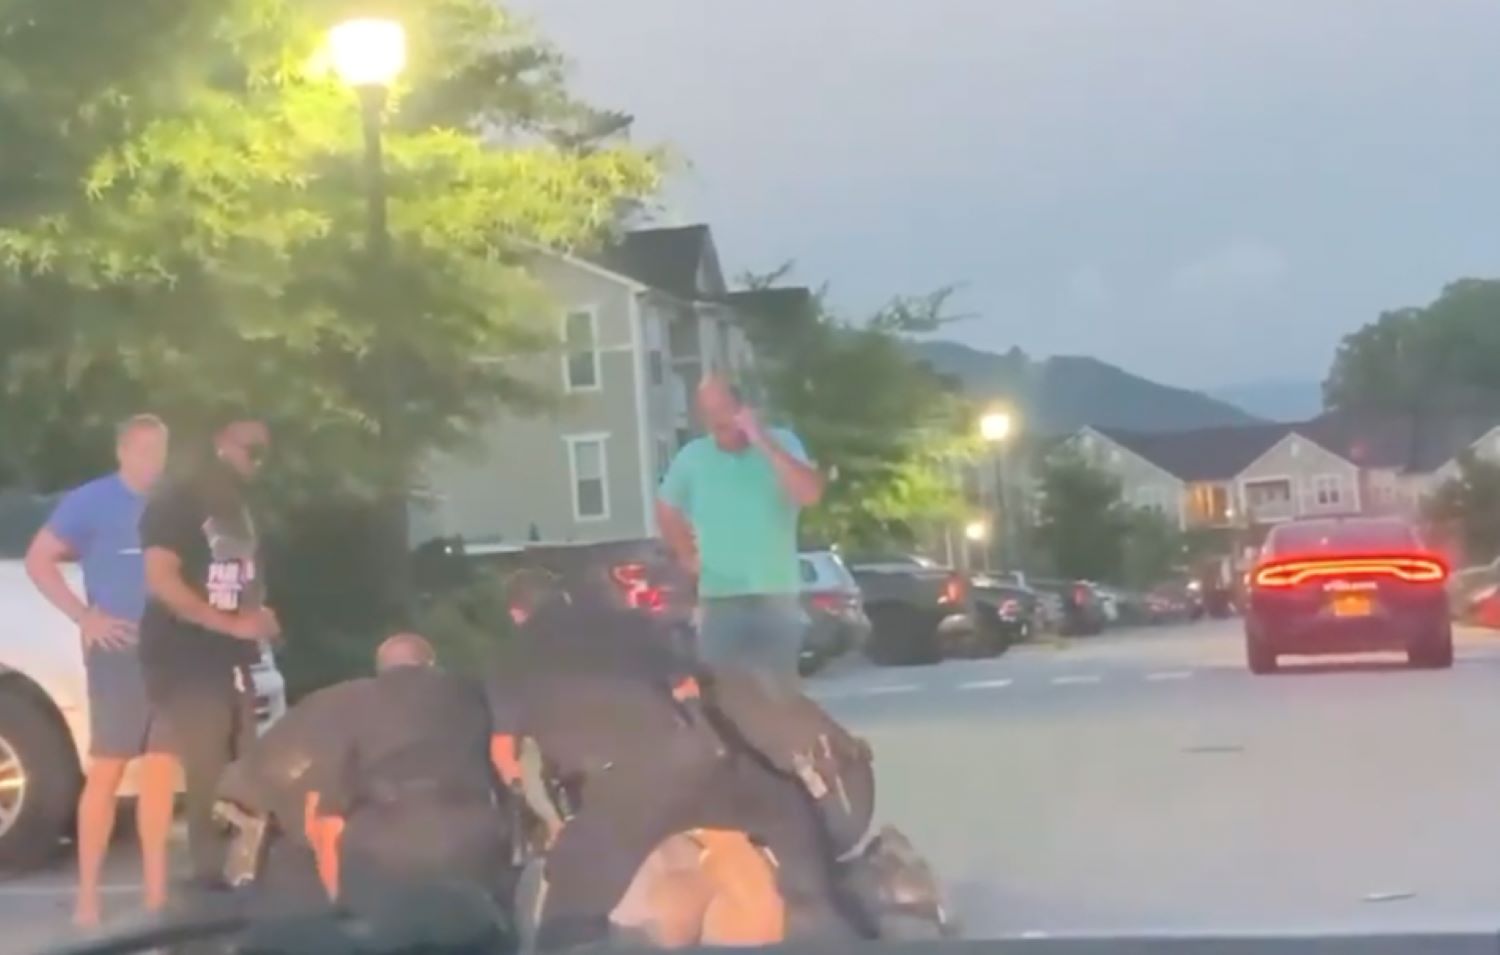  Police used this dangerous restraint during a fatal arrest, so why isn’t anyone talking about it? 